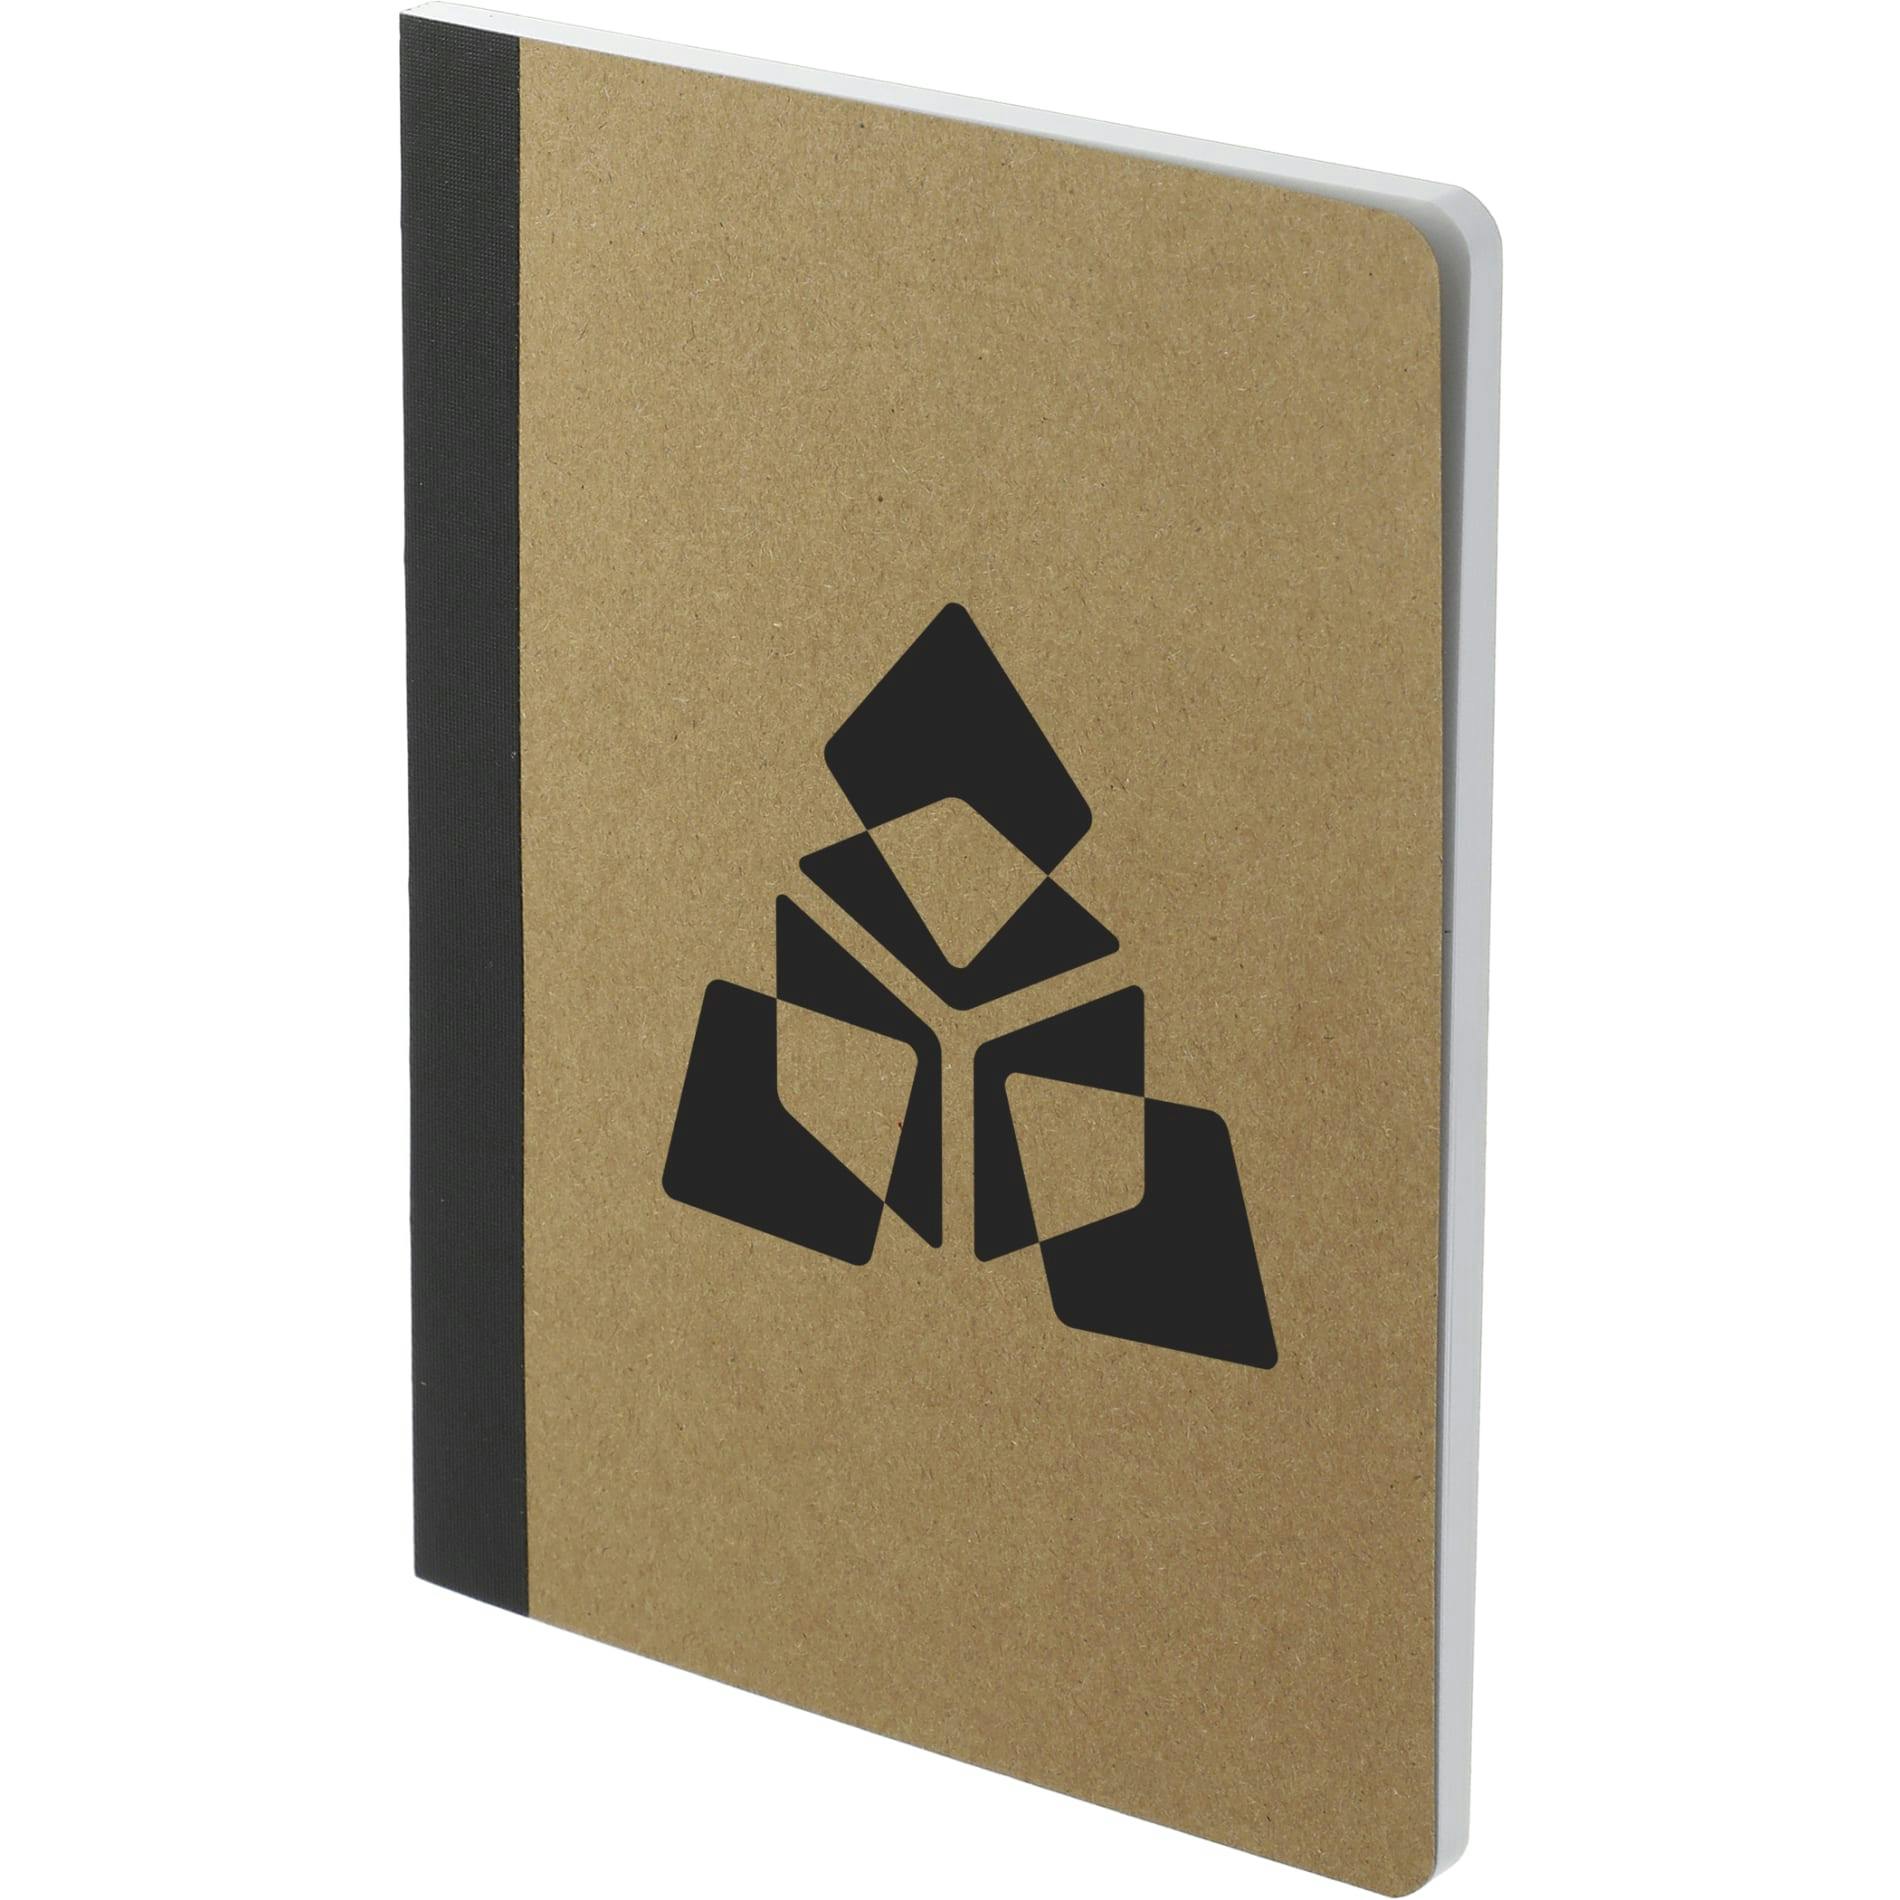 5" x 7" FSC® Mix Composition Notebook - additional Image 4